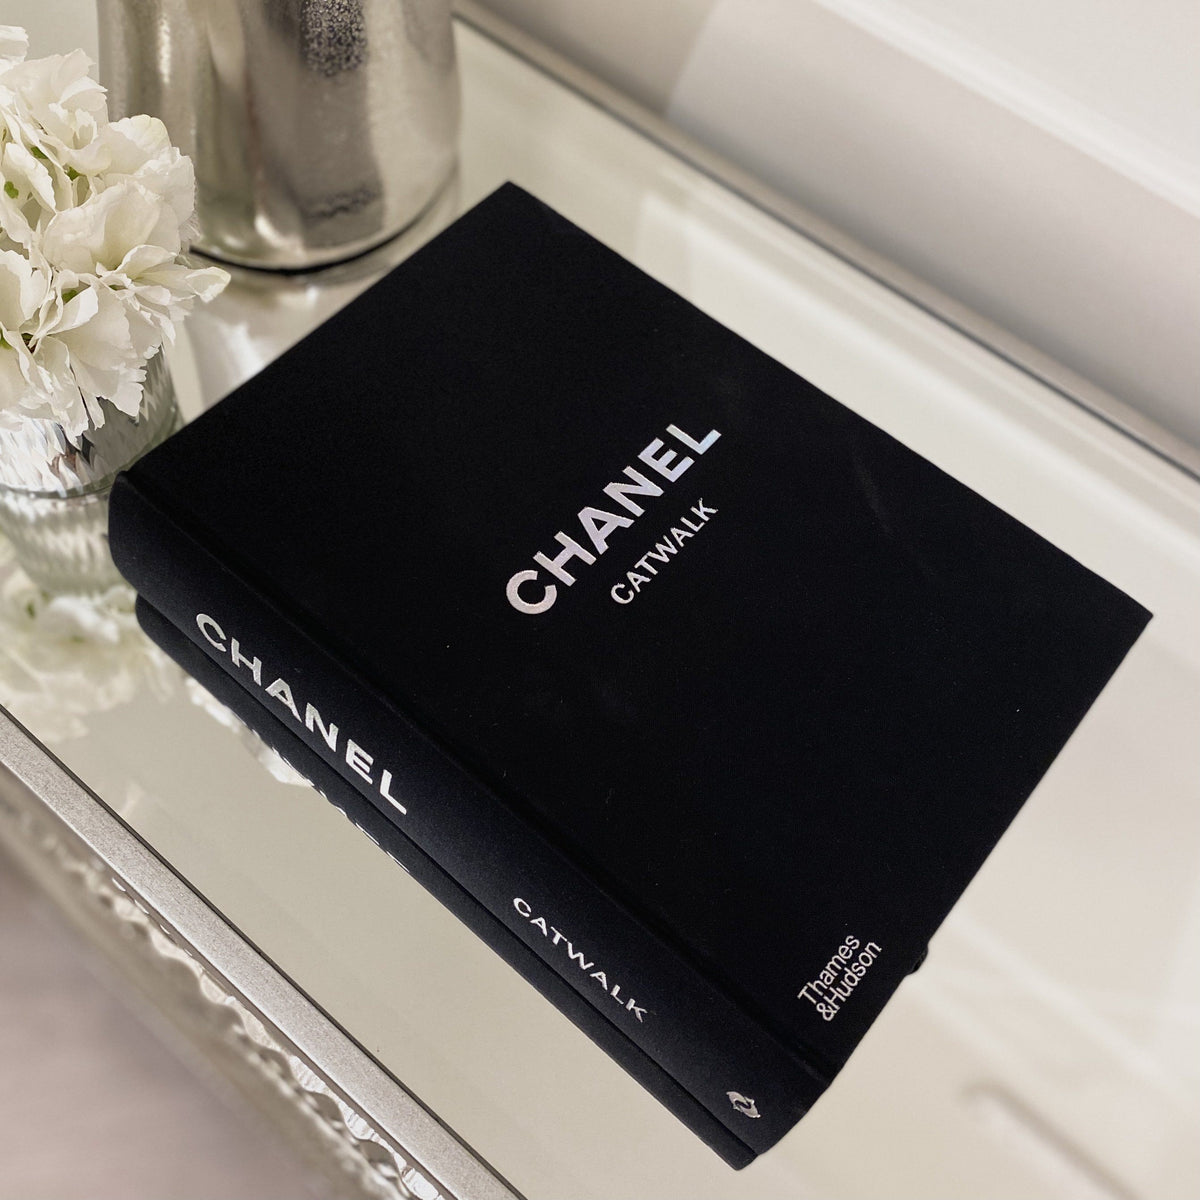 Chanel Catwalk Book Table Books Rowen Homes